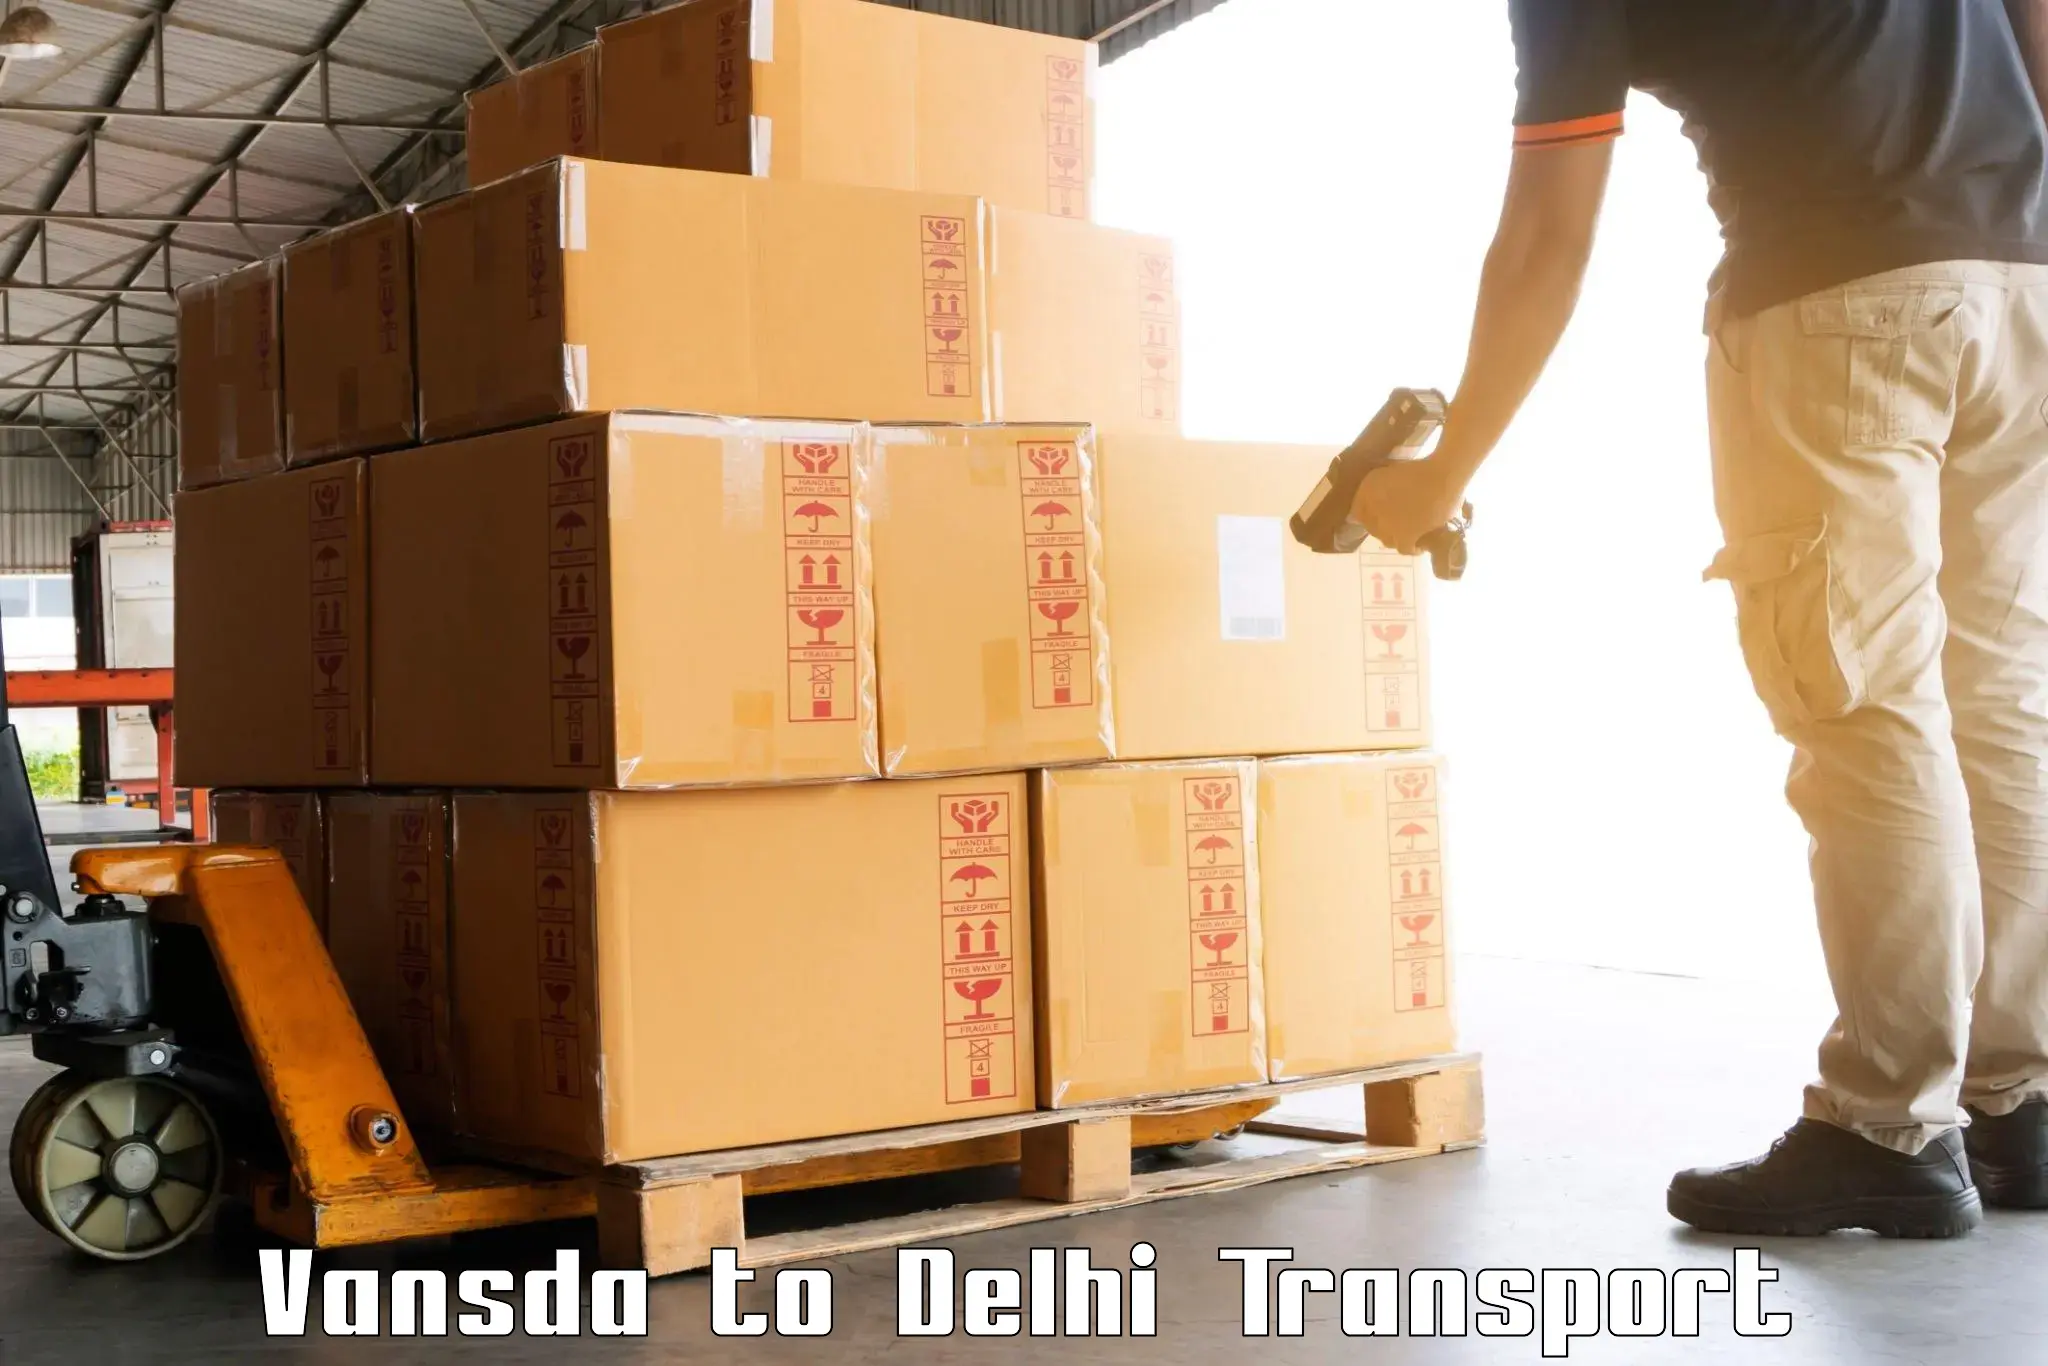 Daily transport service Vansda to Lodhi Road